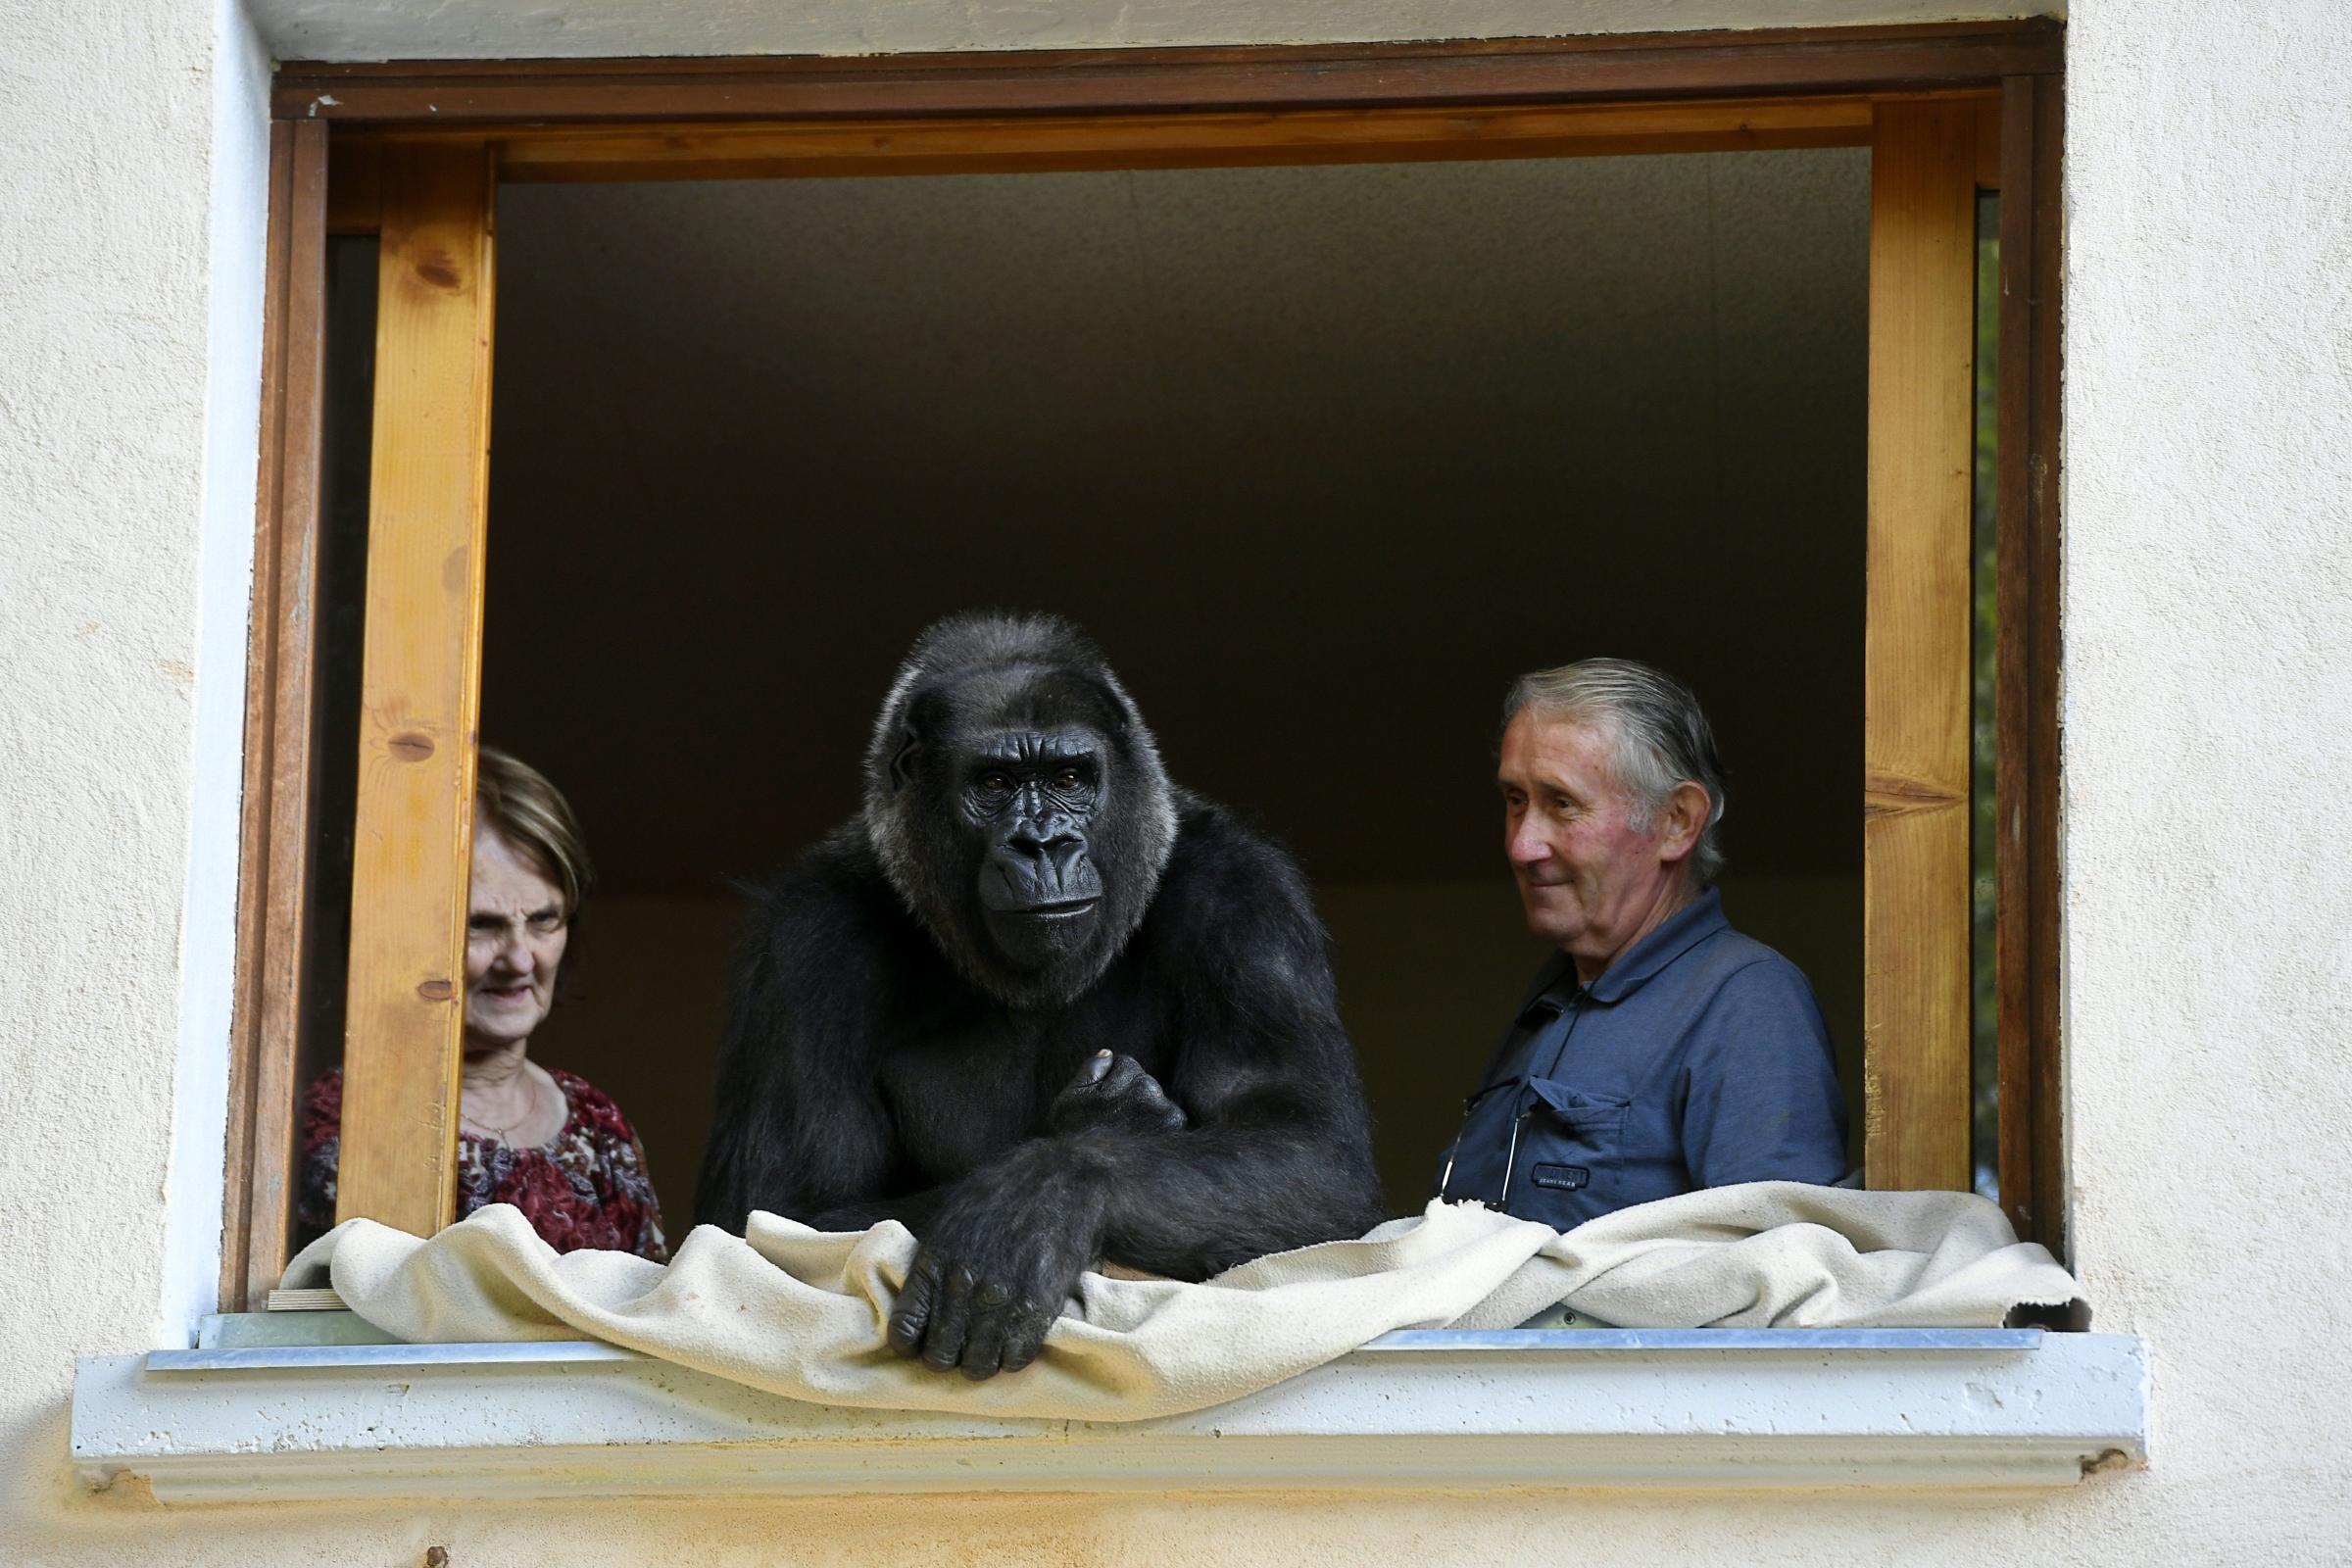 Pierre Thivillon, right, director of the zoological park of Saint-Martin-La-Plaine and his wife Eliane look at Digit, an 18-year-old female gorilla in Saint-Martin-La-Plaine, France, on Aug. 19, 2016.